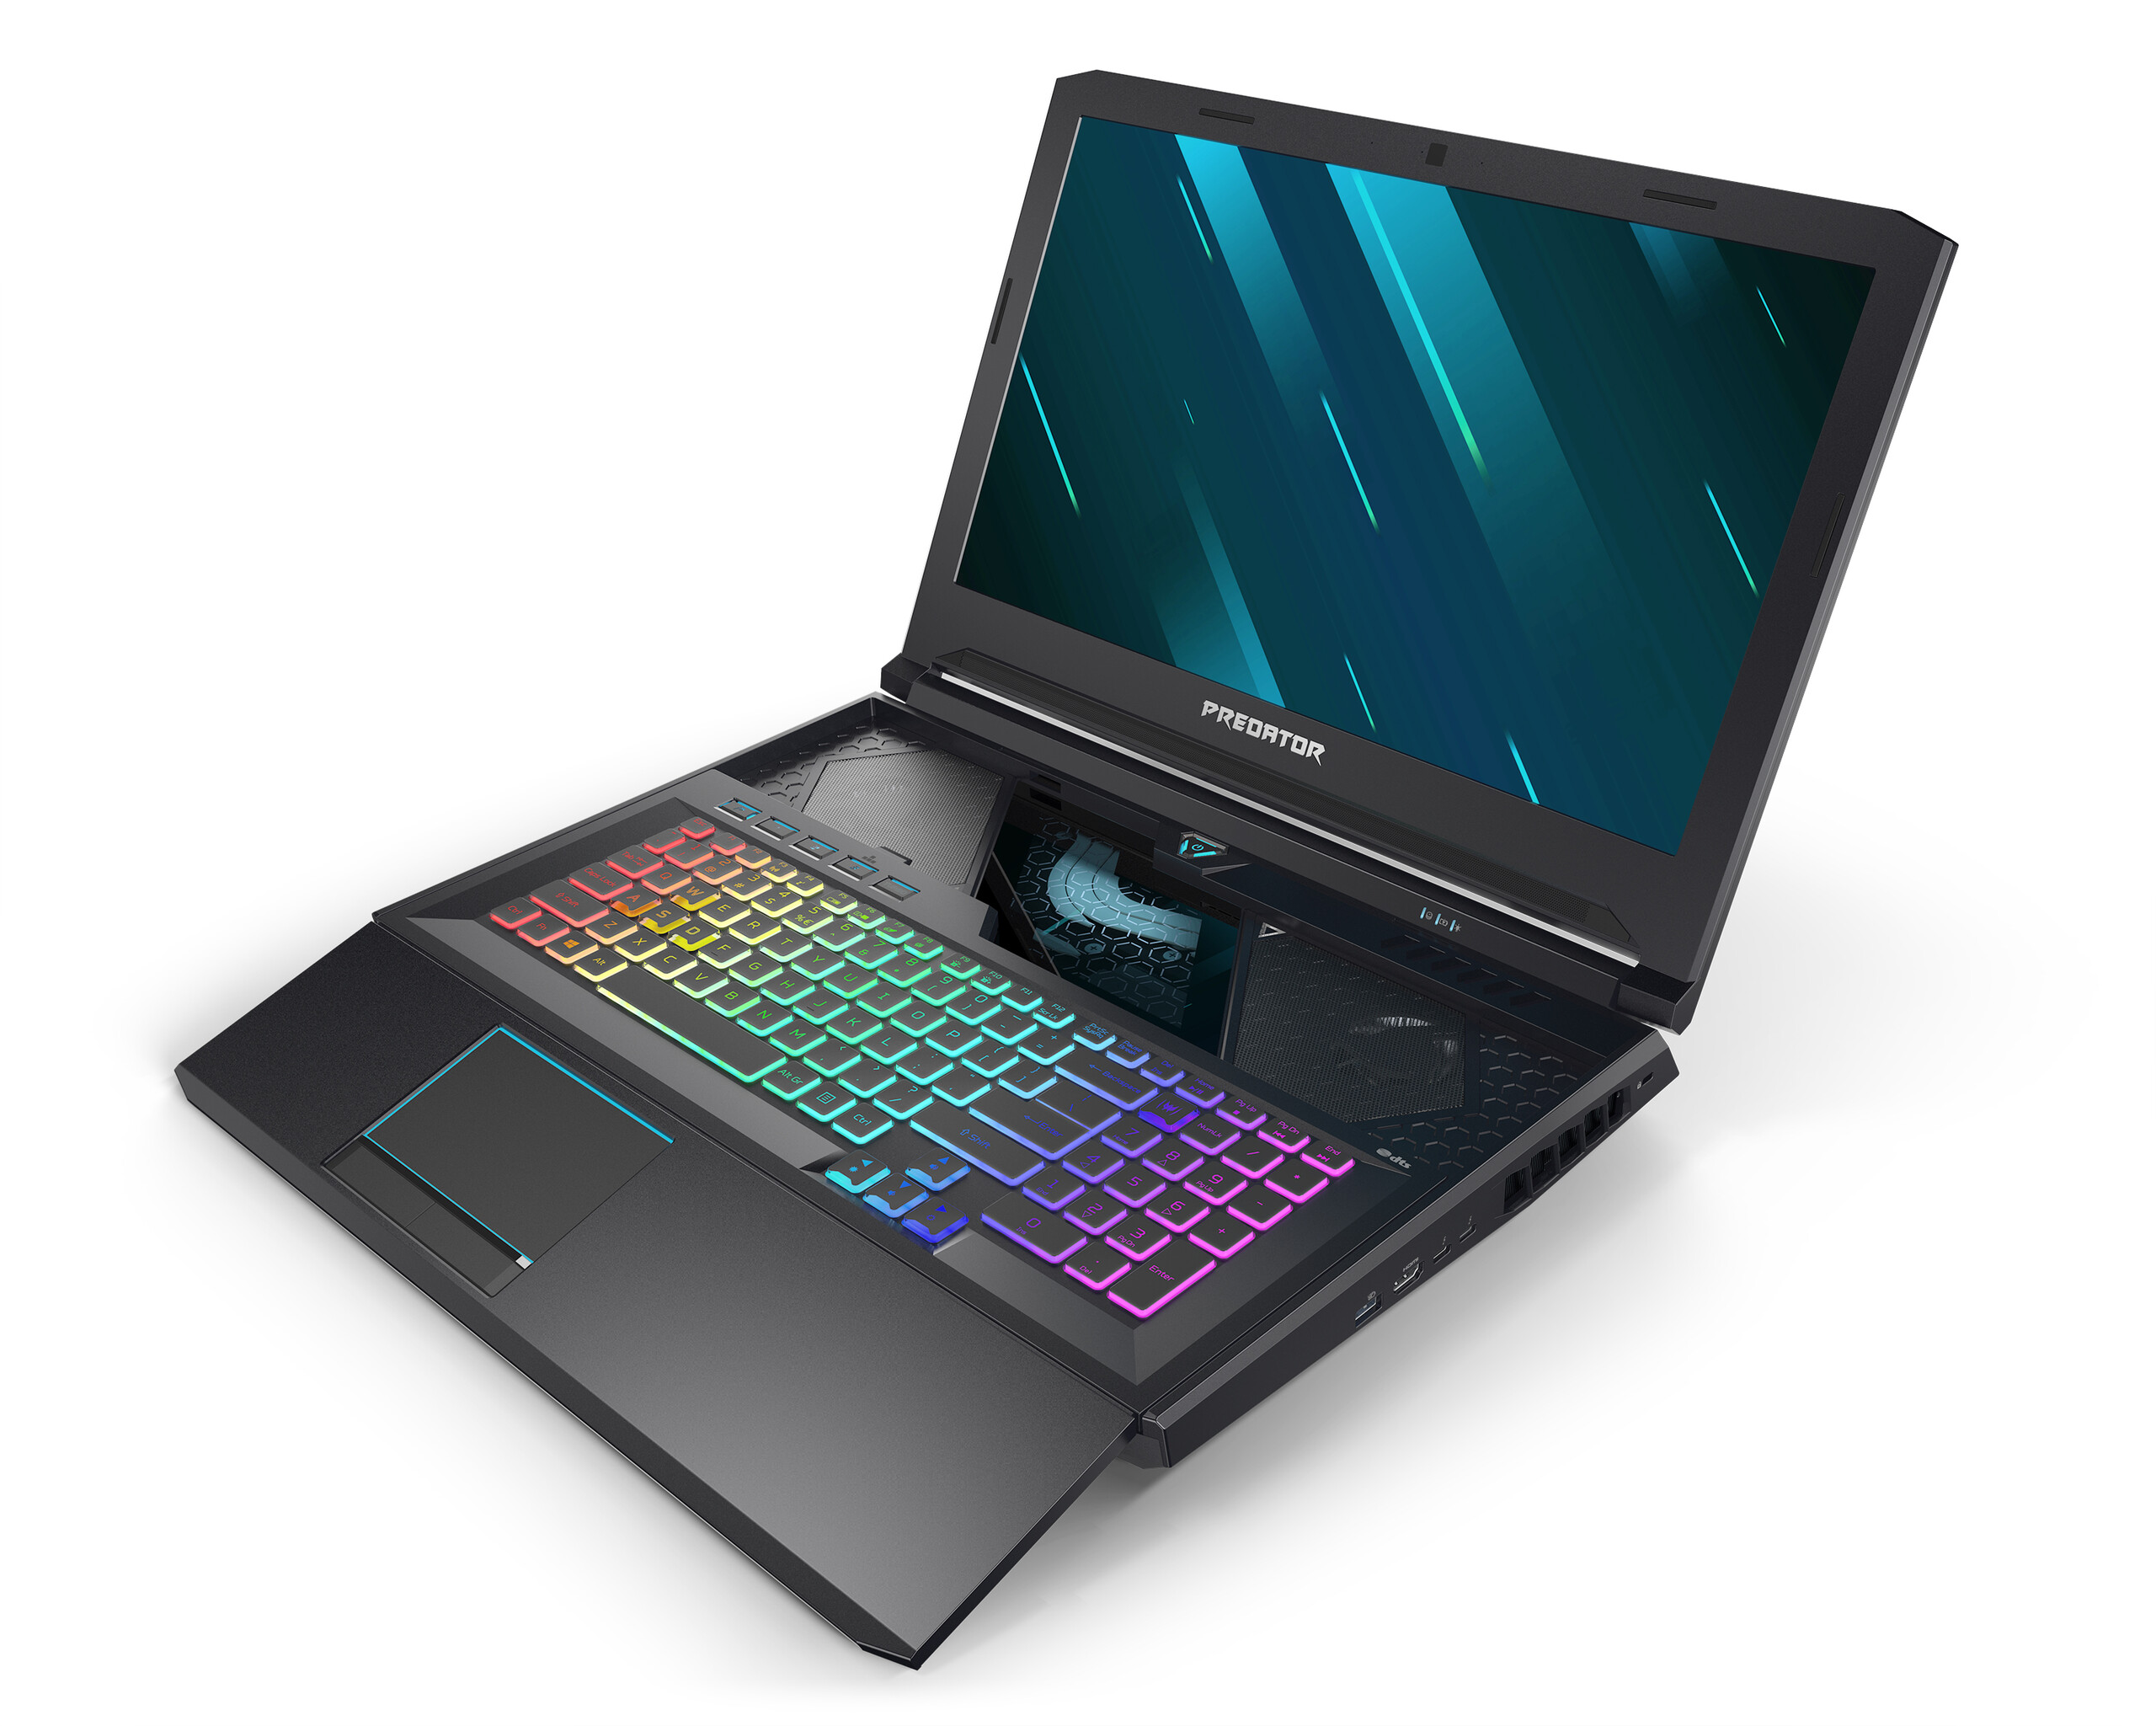 Acer Predator Helios The Innovative Gaming Laptop Returns With Up